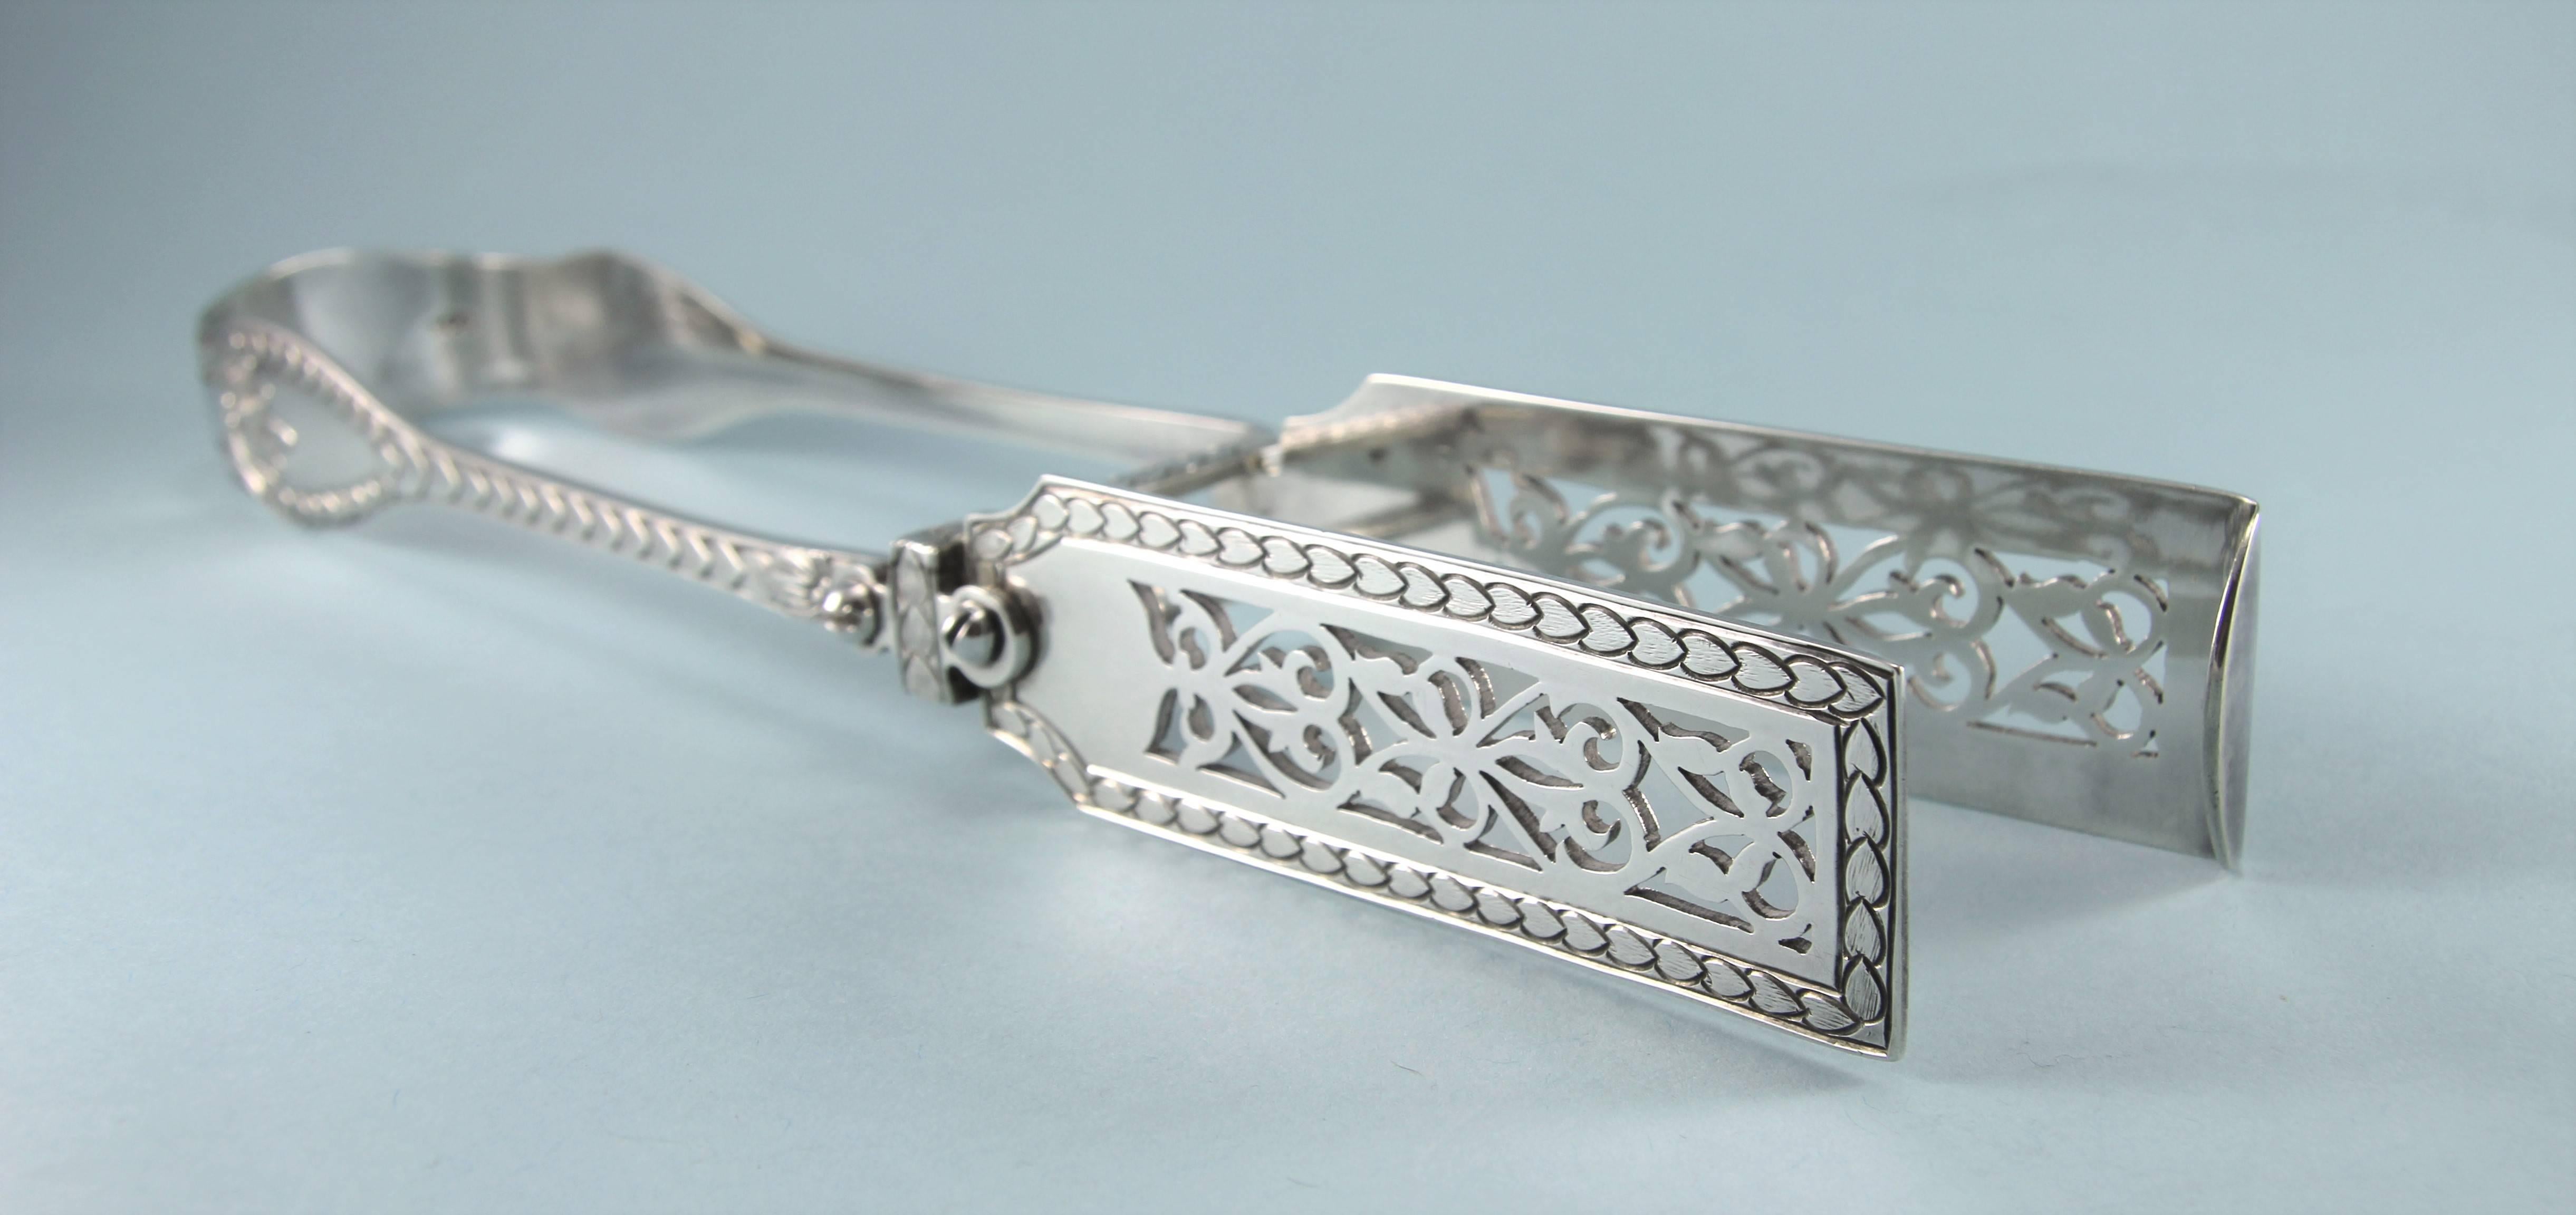 Very rare Palm patterned sterling silver asparagus tongs made in London in 1878 by George Adams. 

The bright-cut palm design stands out well against the plain silver background. 

The end of the tongs is engraved with a contemporary family